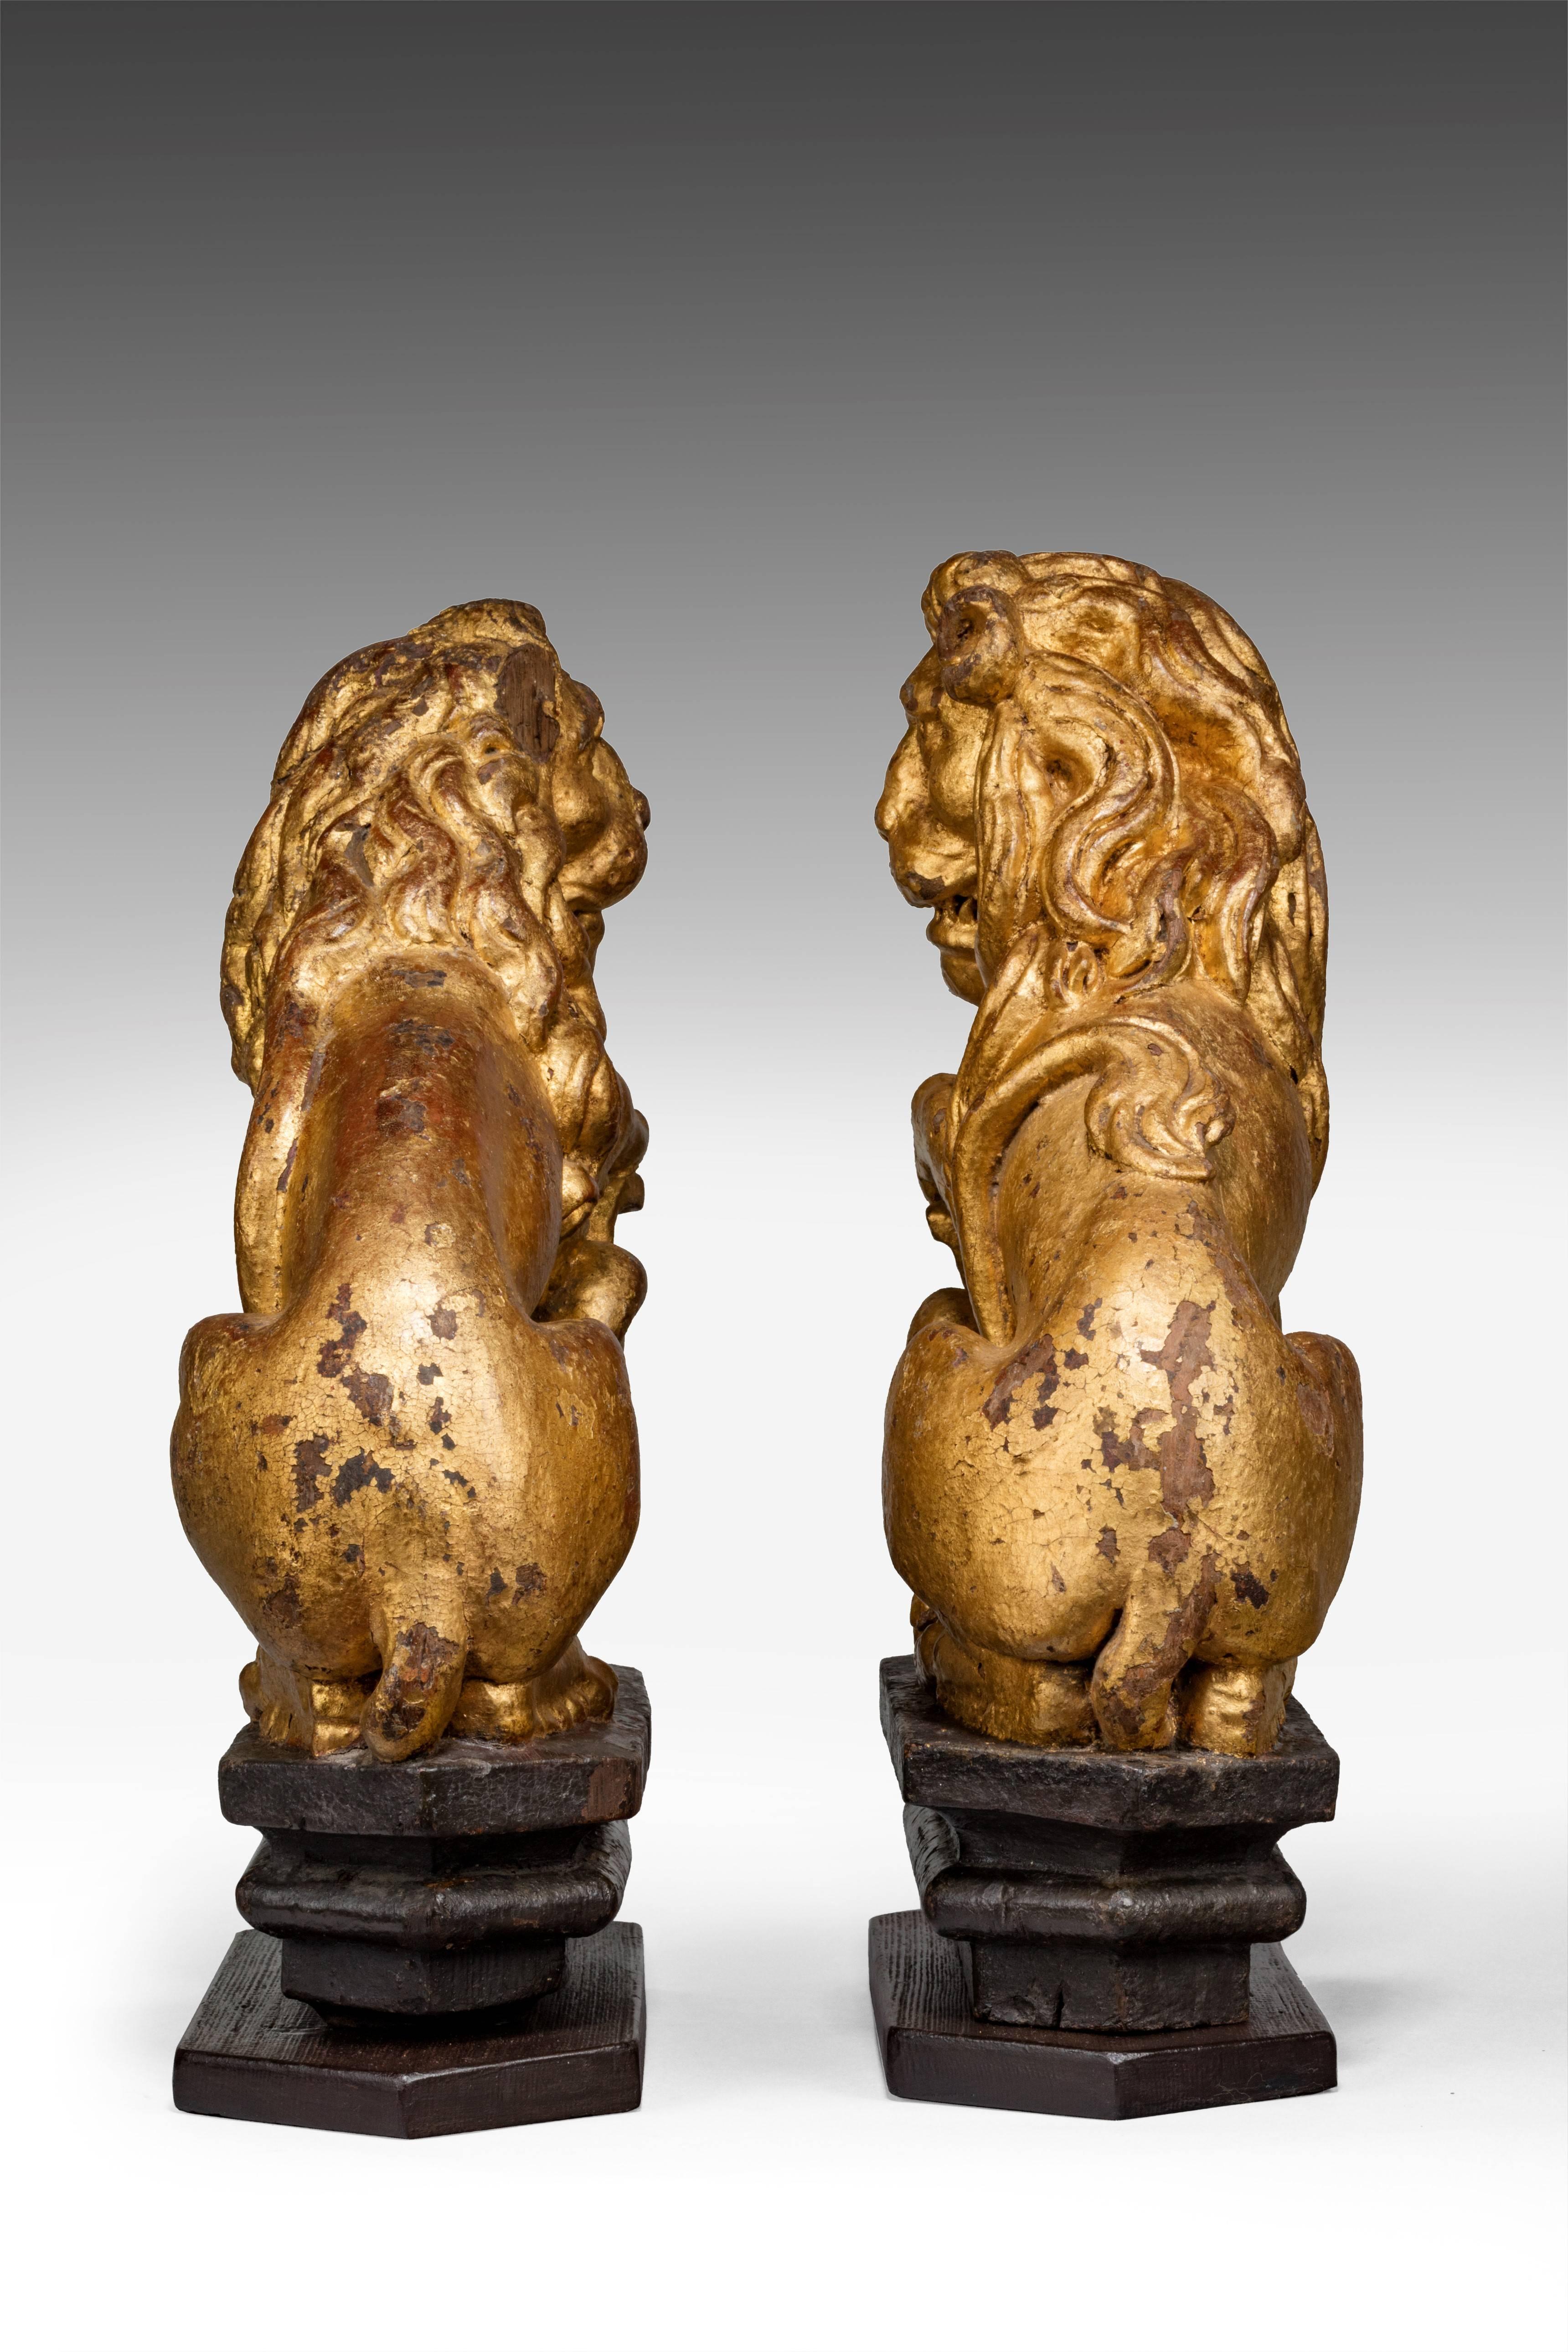 Provenance: Originally from the Speaker’s Pew at St. Margaret’s, Westminster. 
Bought by Nicholas Spencer Esq. and gifted to St. Margaret’s of Antioch in Ifield, Crawley, West Sussex, circa 1770.

Modelled as an opposing pair, each seated, with a